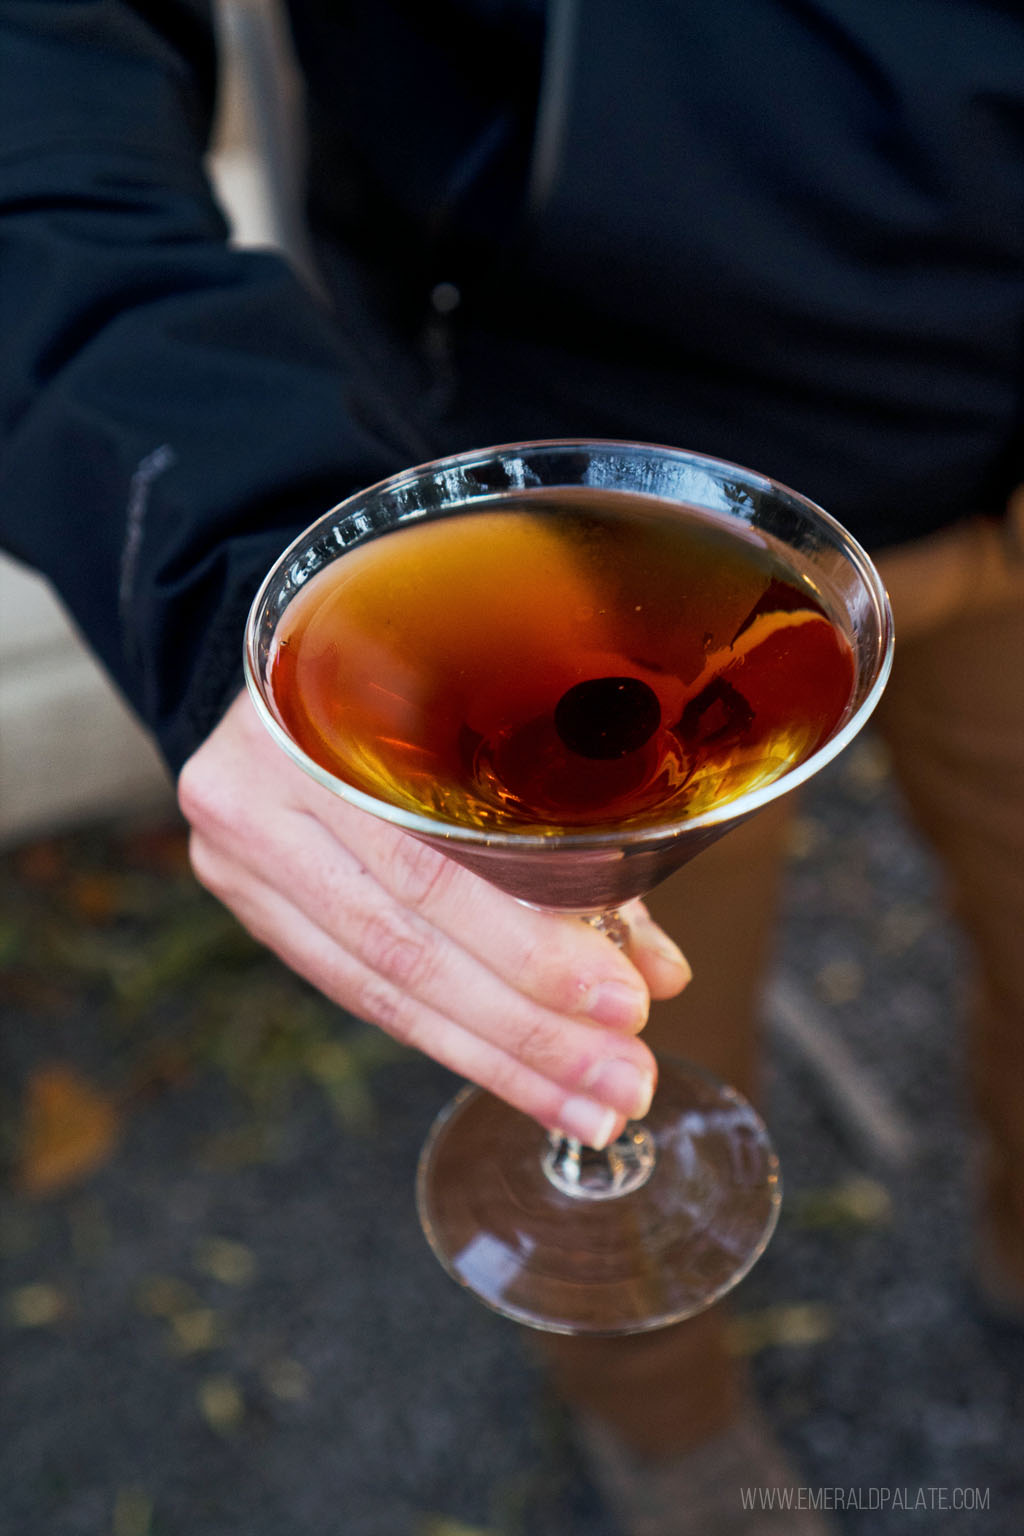 person holding a martini glass with a cherry and cocktail in it